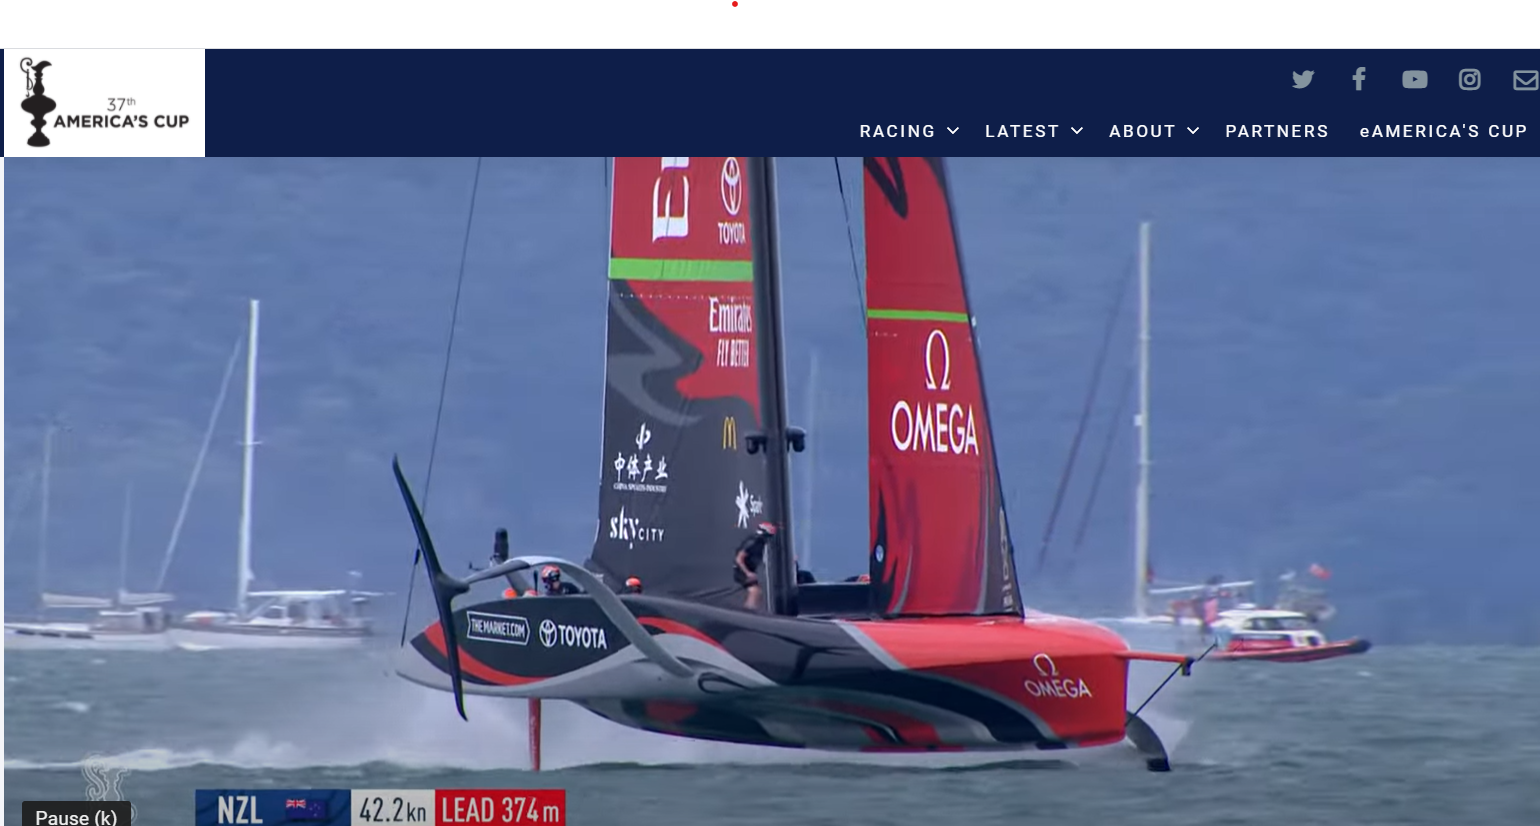 Everything you wanted to know about the America's Cup including Cork's